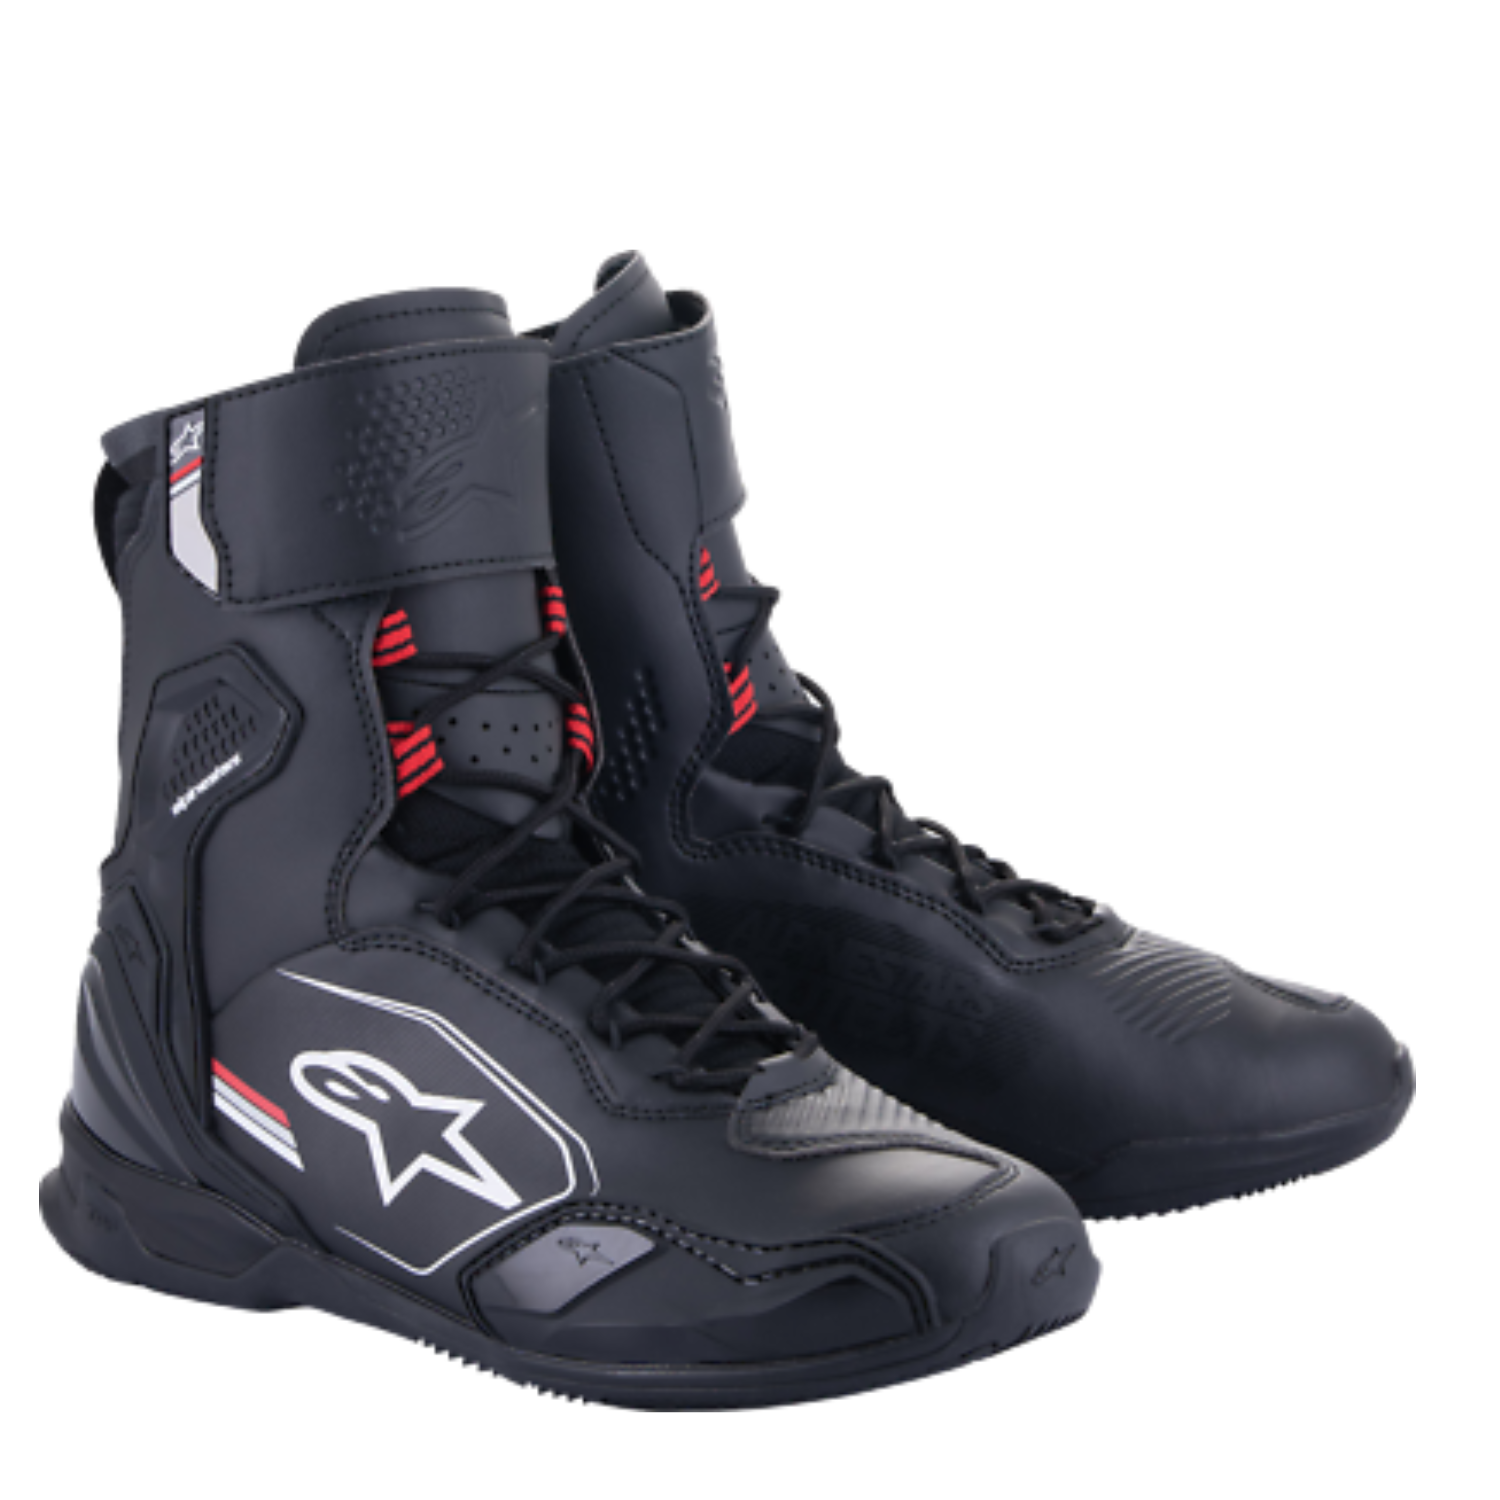 Image of EU Alpinestars Superfaster Shoes Black Gray Bright Red Taille US 105